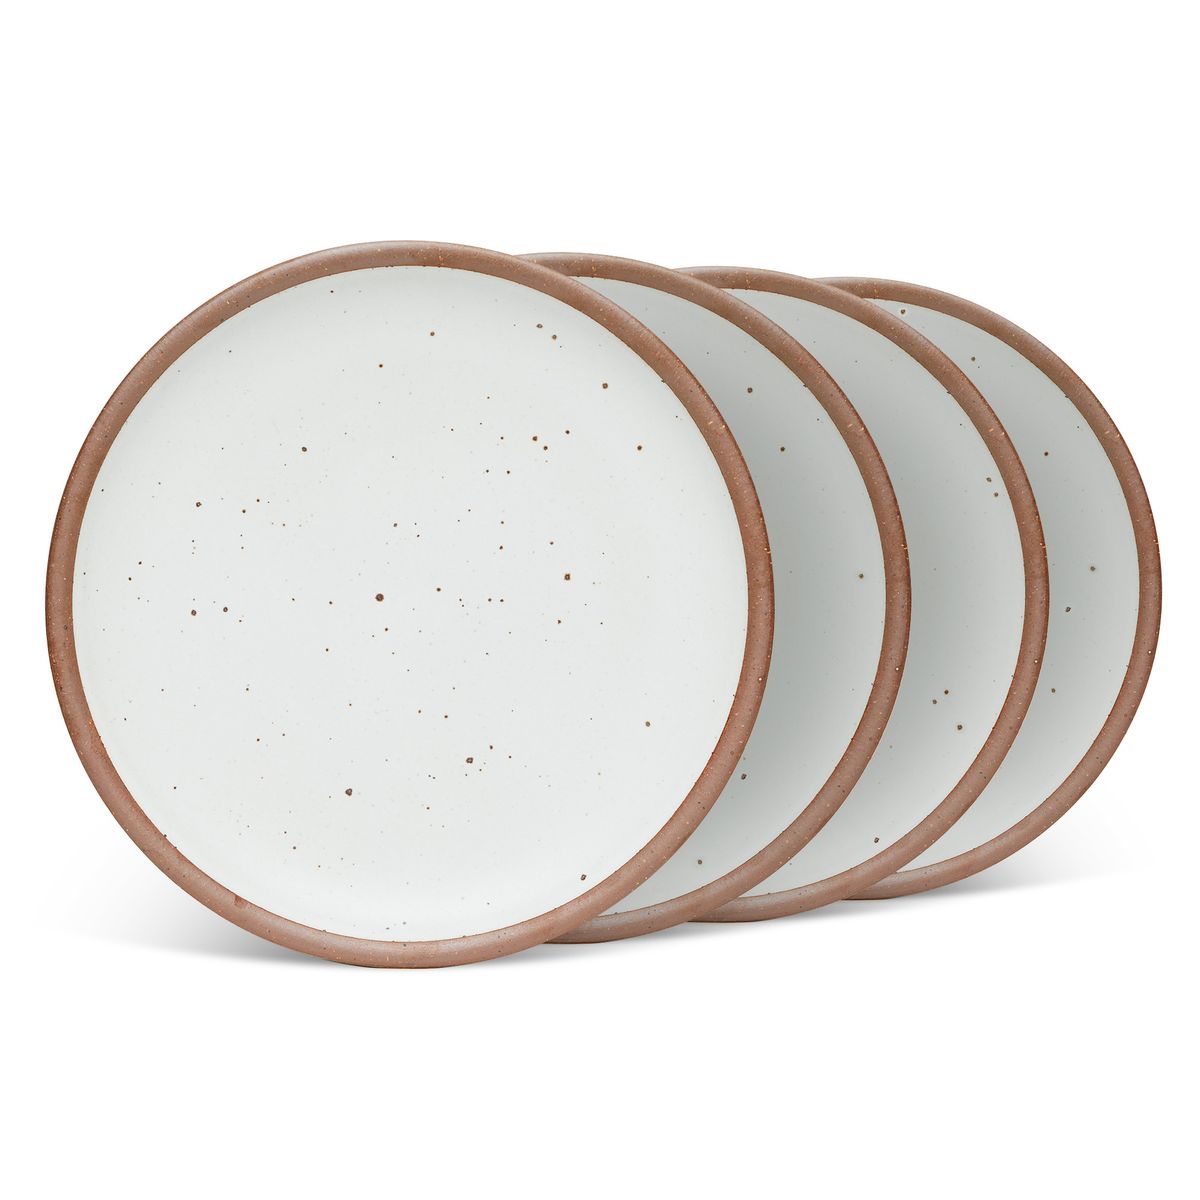 4 dinner sized ceramic plates in a cool white color featuring iron speckles and an unglazed rim